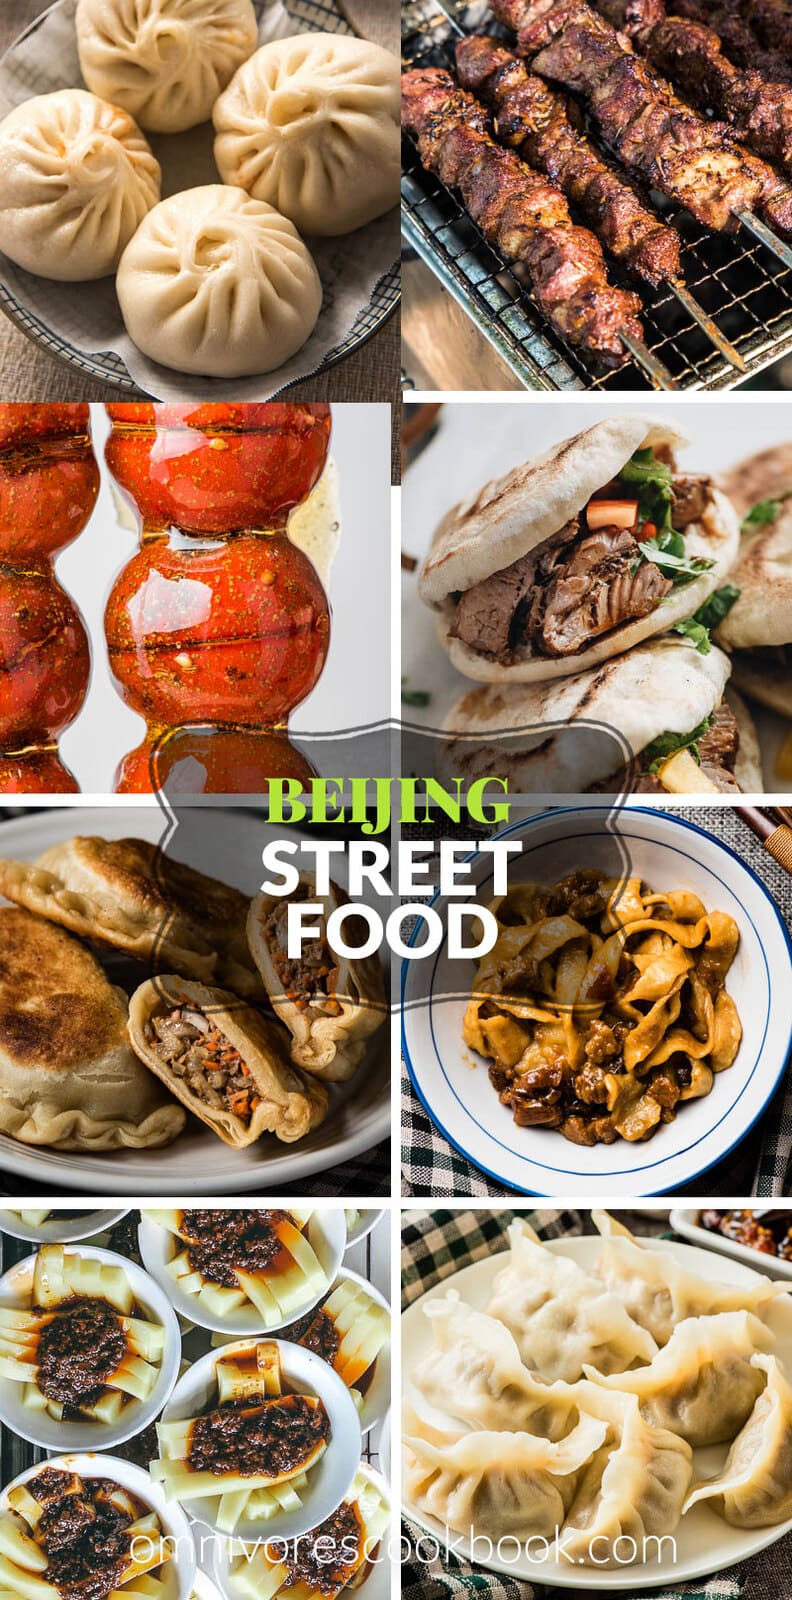 An Introduction to Beijing Street Food